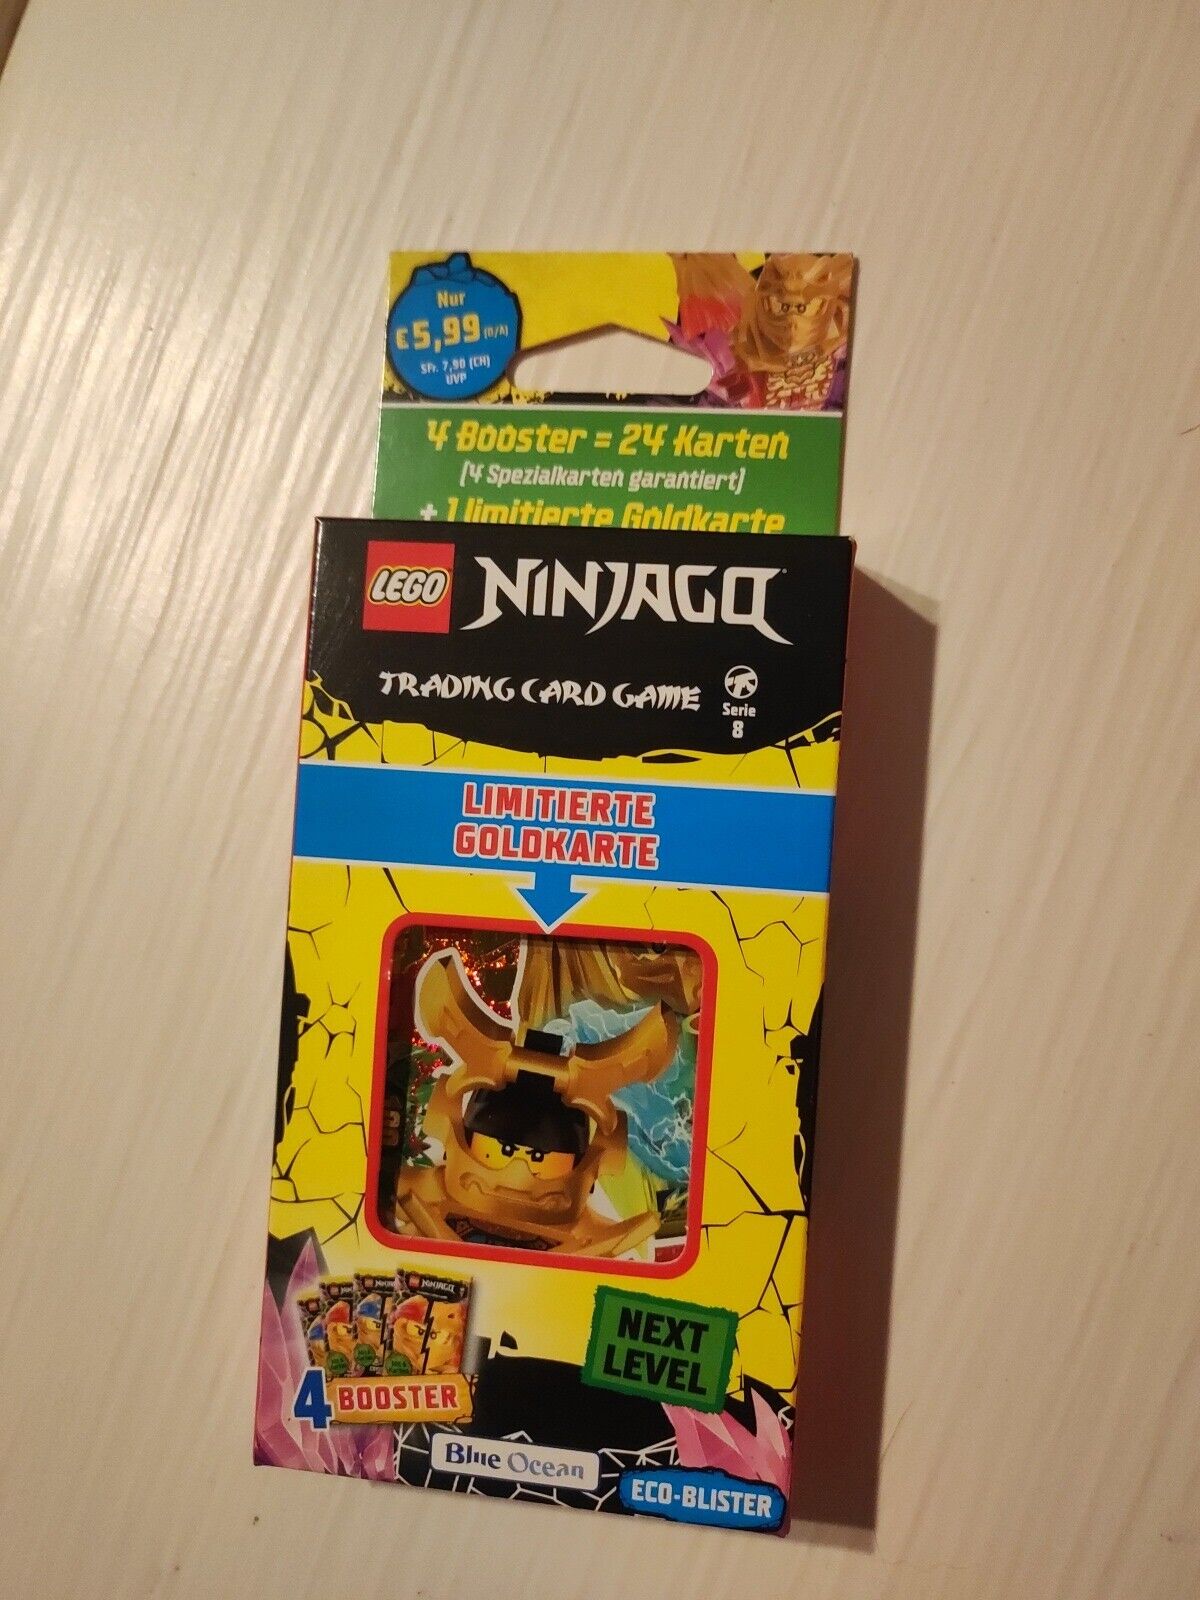 LEGO NINJAGO TRADING CARD GAME SERIES 8 NEXT LEVEL 4BOOSTER, 24 CARDS, 1GOLD CARD